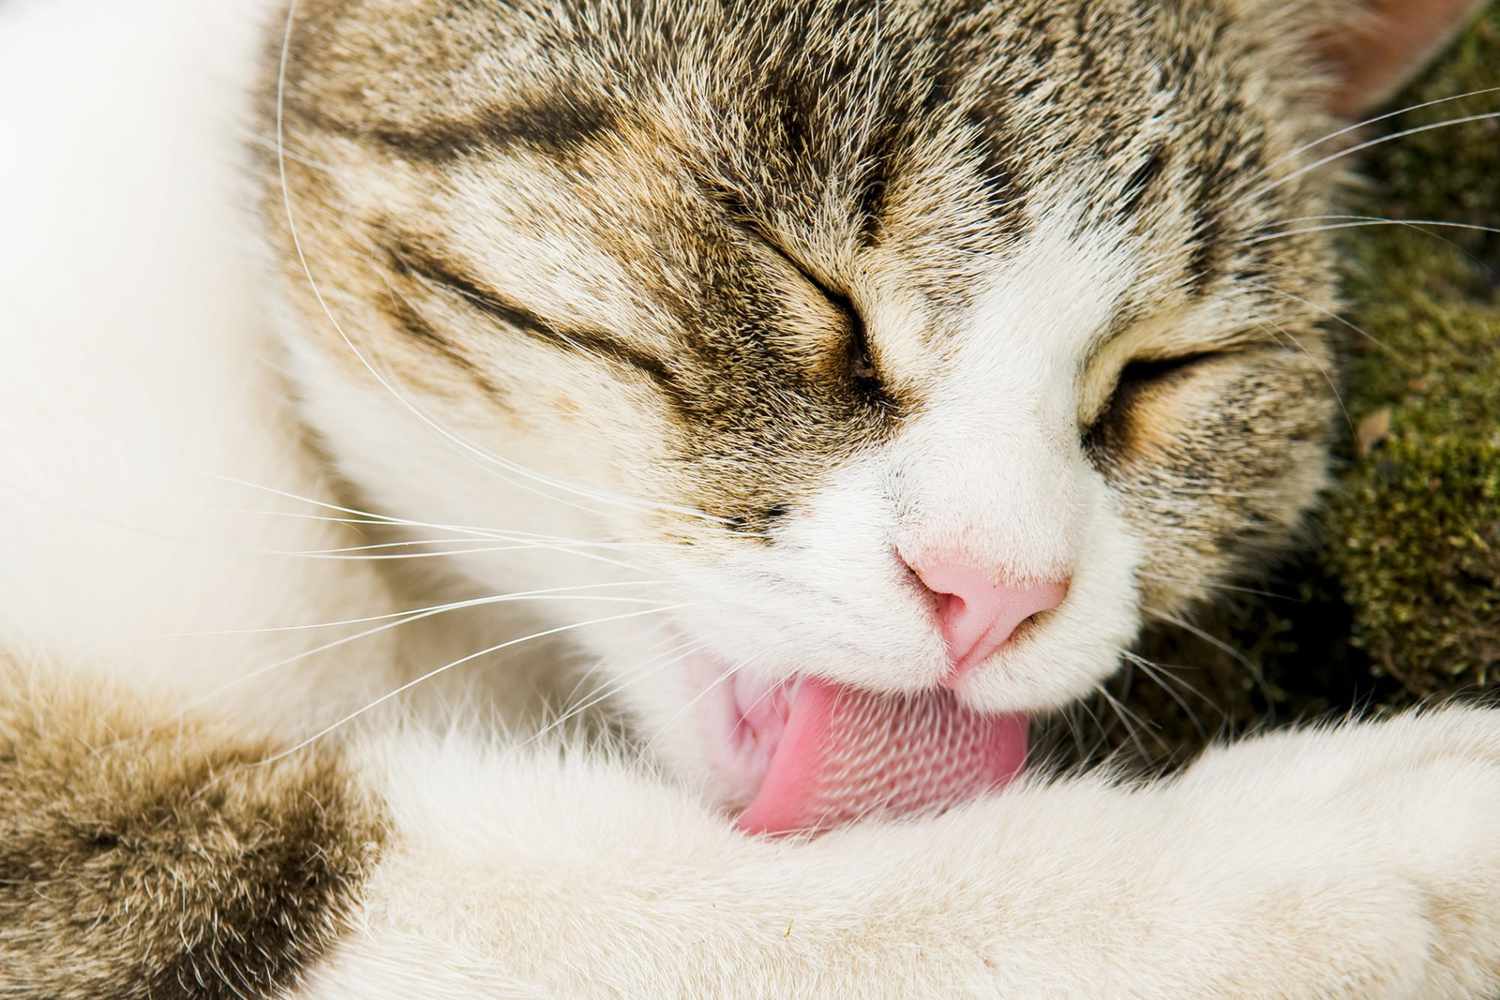 Close-up of a cat grooming itself, releasing allergens